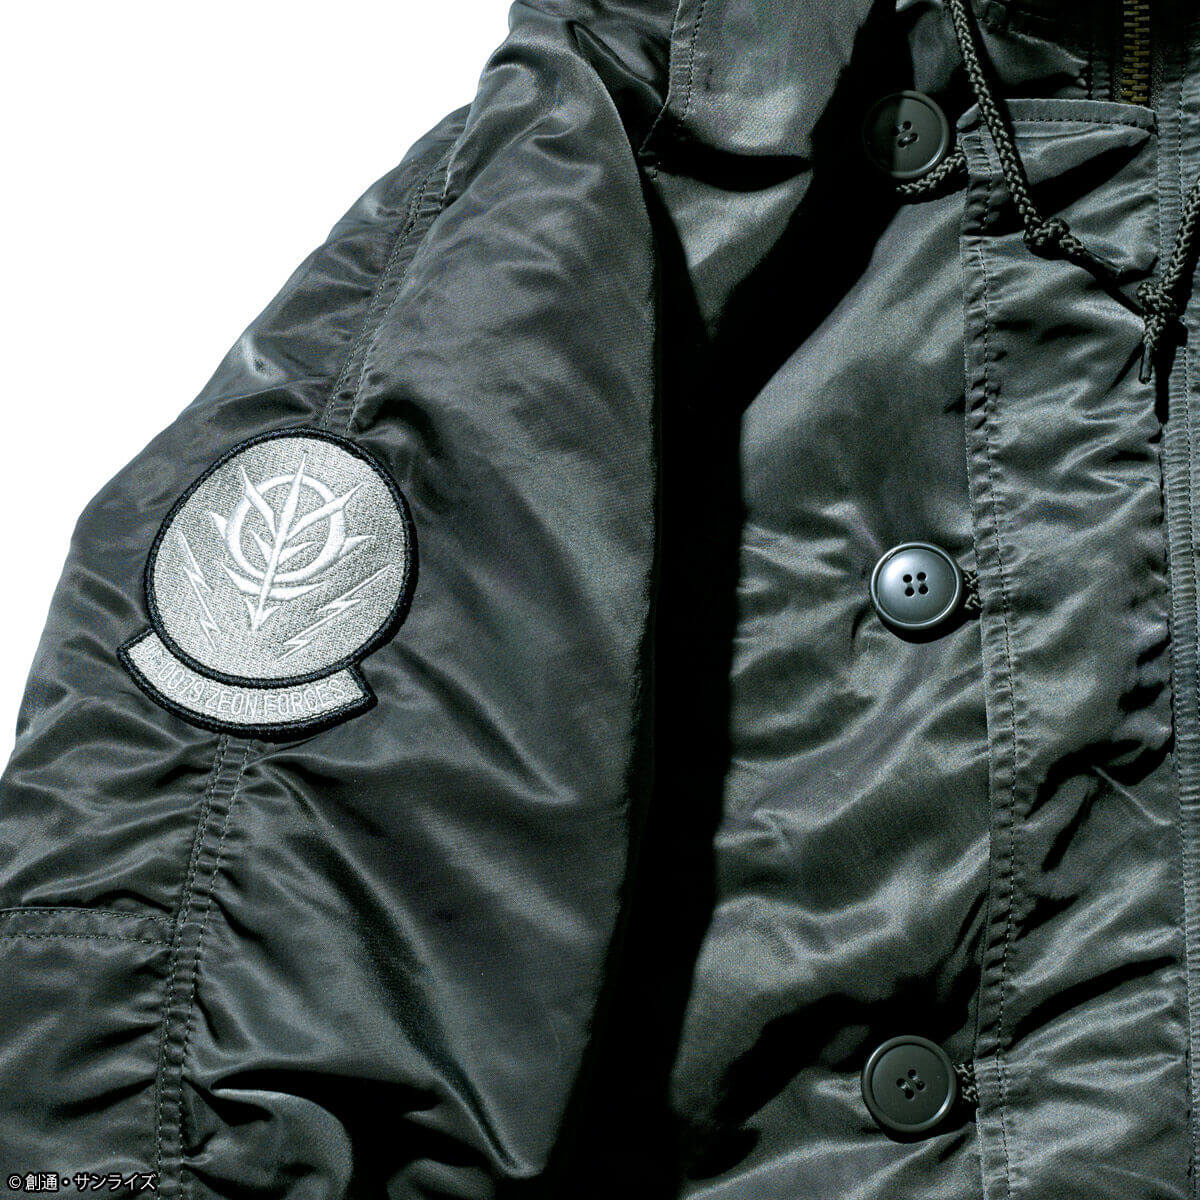 STRICT-G x Alpha Industries Mobile Suit Gundam Collaboration Principality of Zeon Jacket